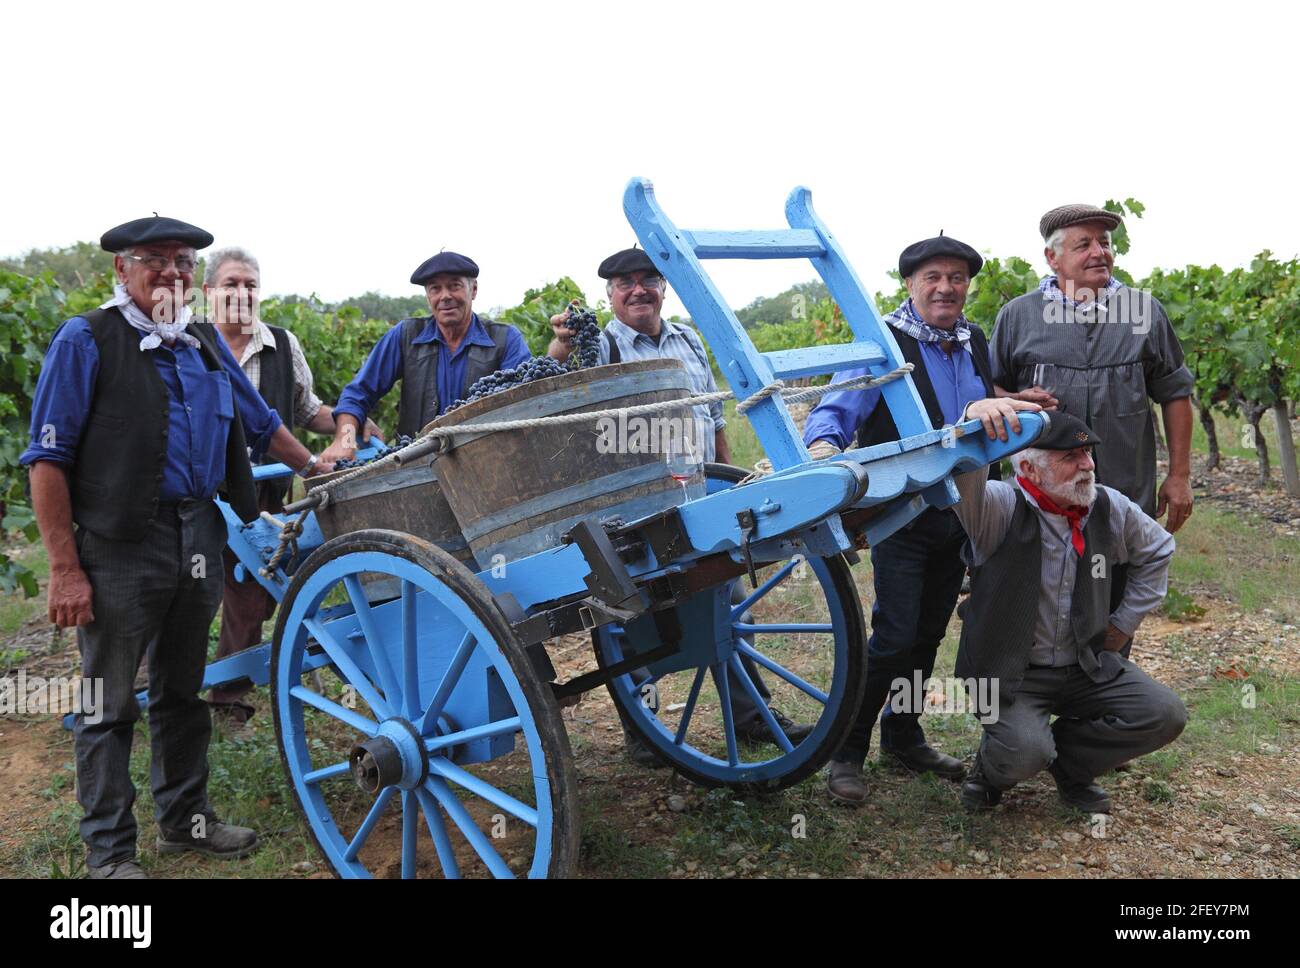 Grape harvest festival in the vineyards with a group of traditionally dressed villagers and blue cart, St Christol, Pays de Lunel, L'Herault, Occitania, Languedoc Roussillon, France Stock Photo